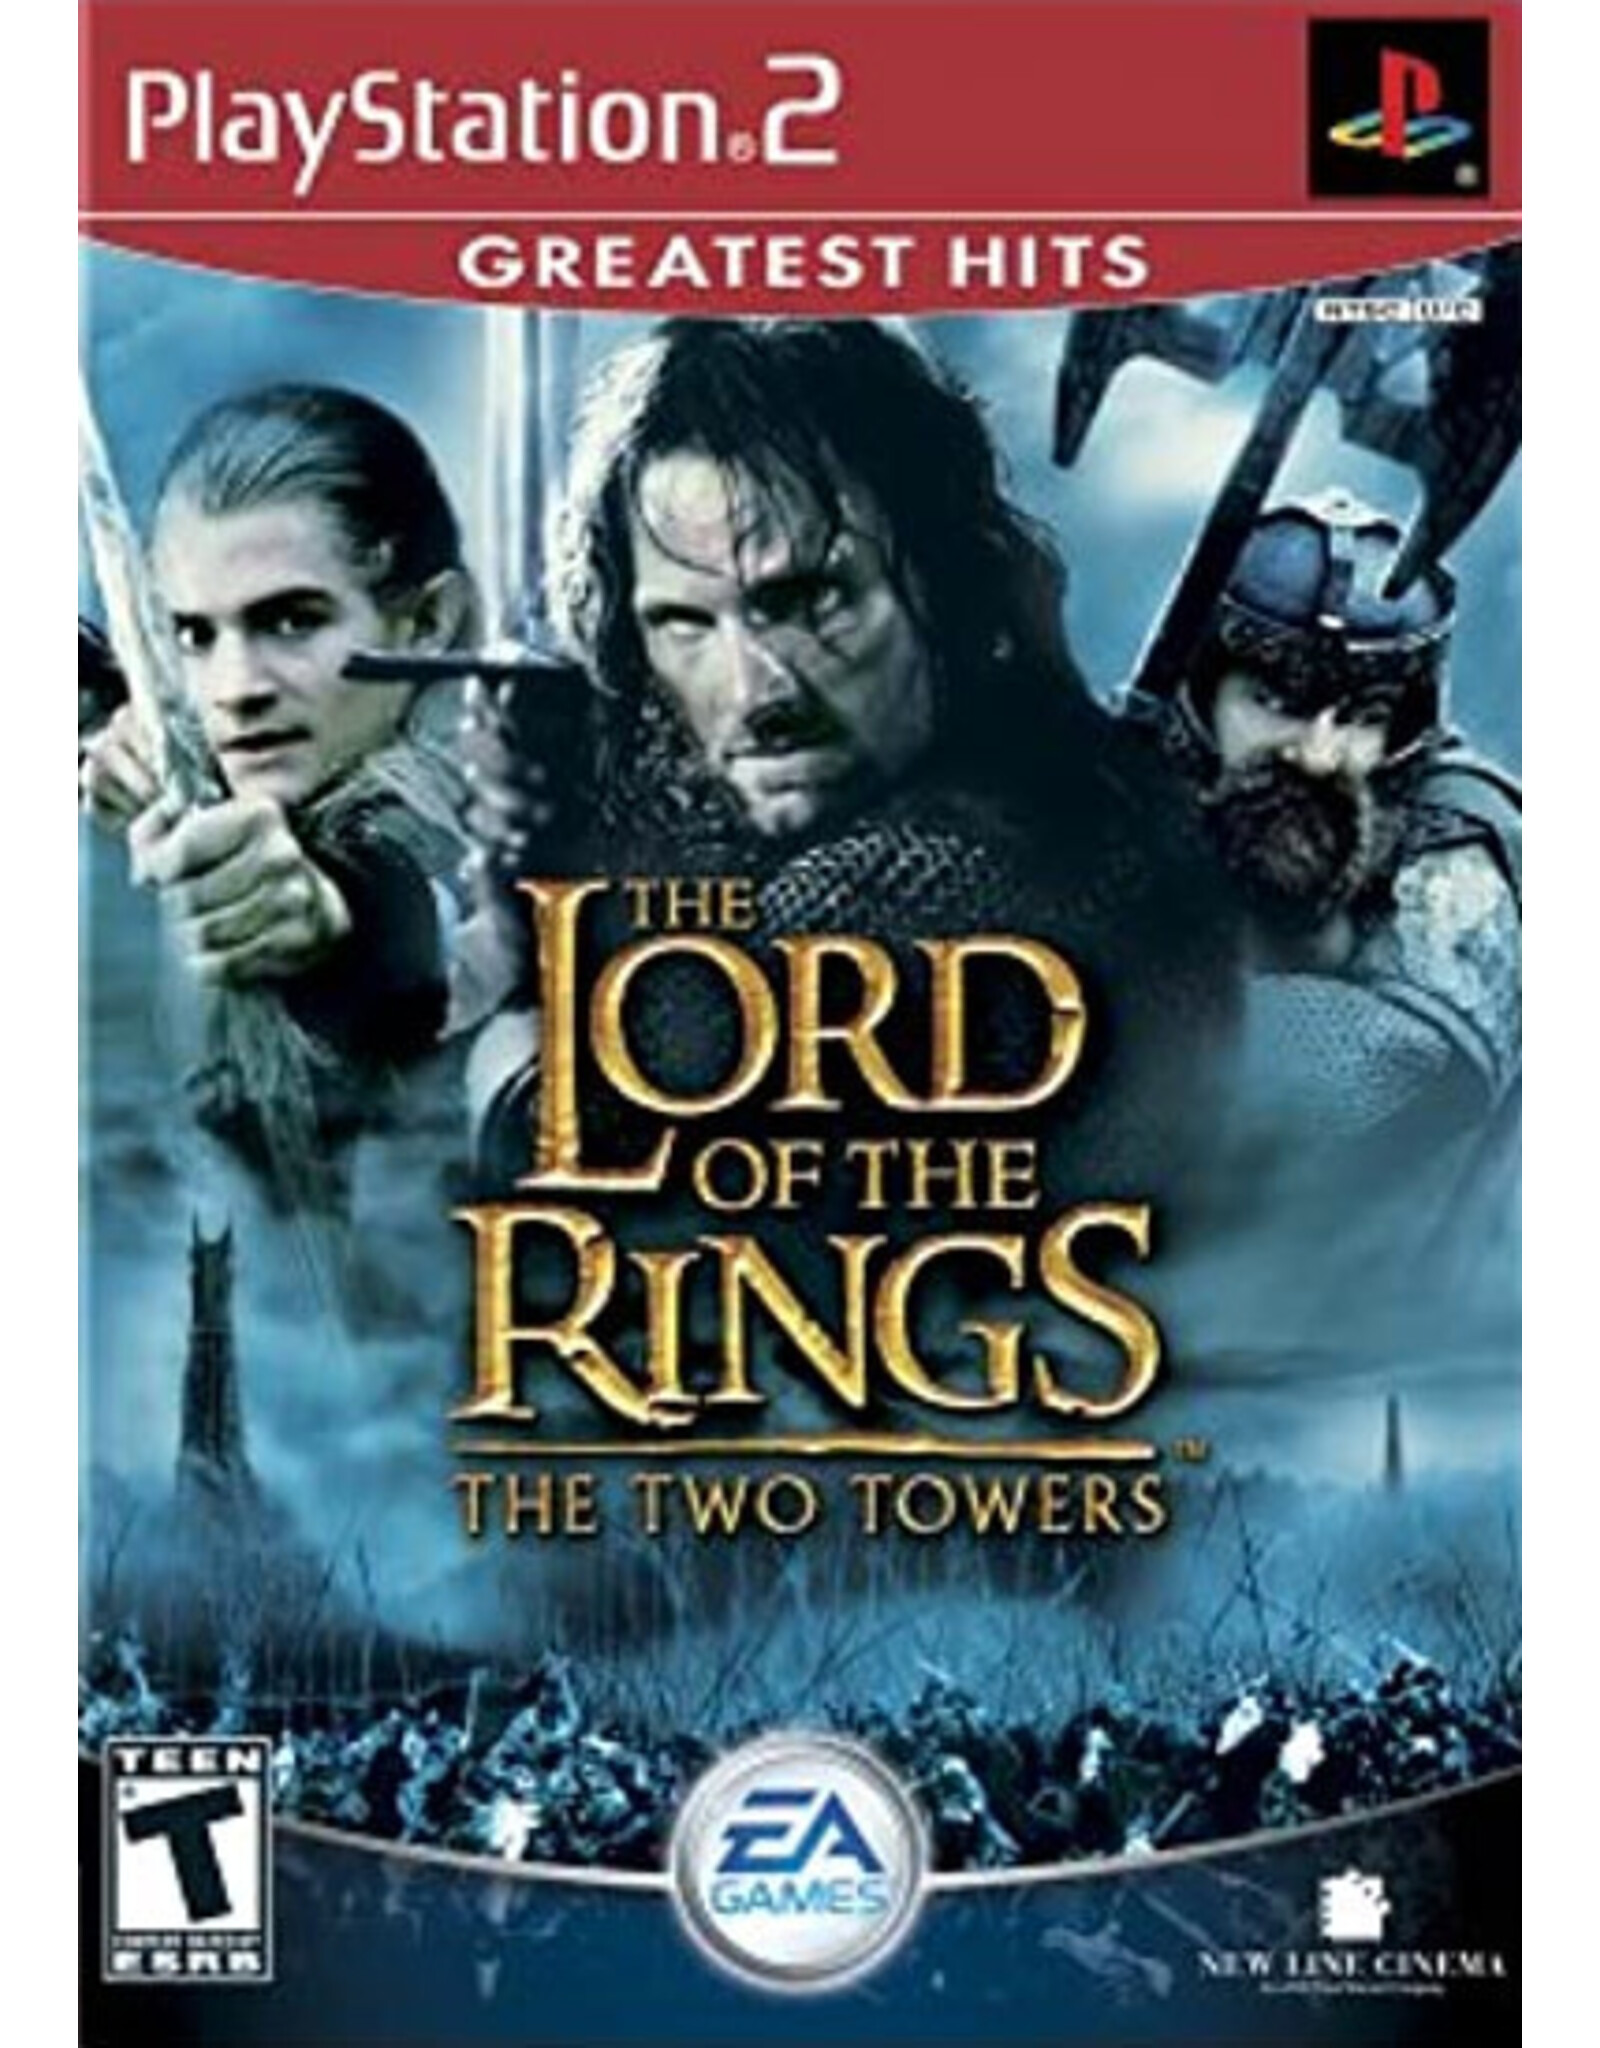 Playstation 2 Lord of the Rings Two Towers - Greatest Hits (Used)